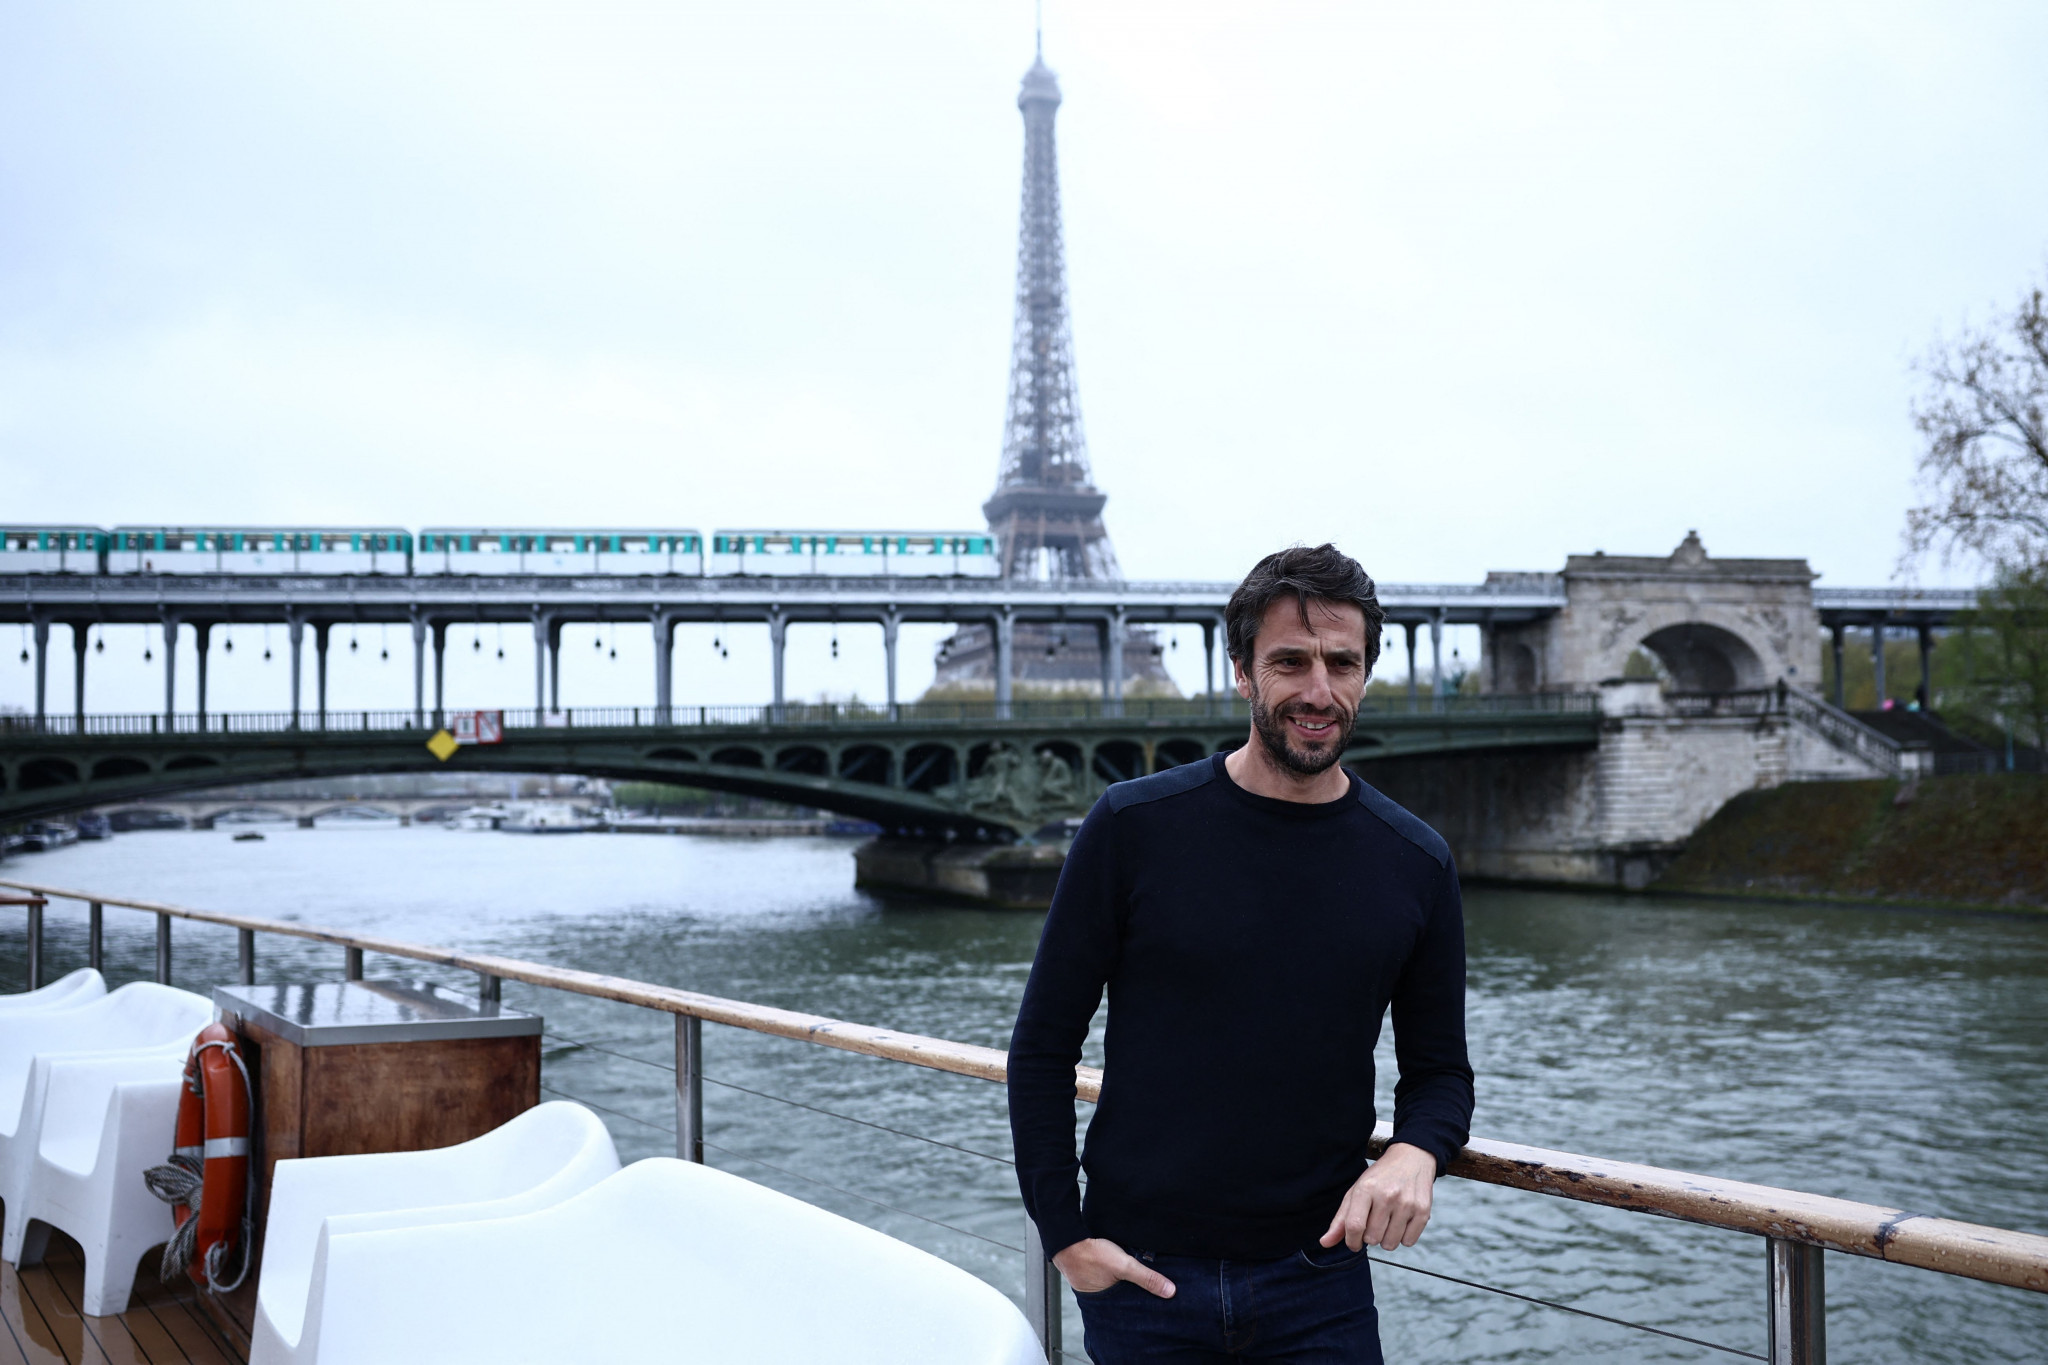 Paris 2024 President Tony Estanguet, pictured here by the River Seine, claimed the first phase of ticket sales was 